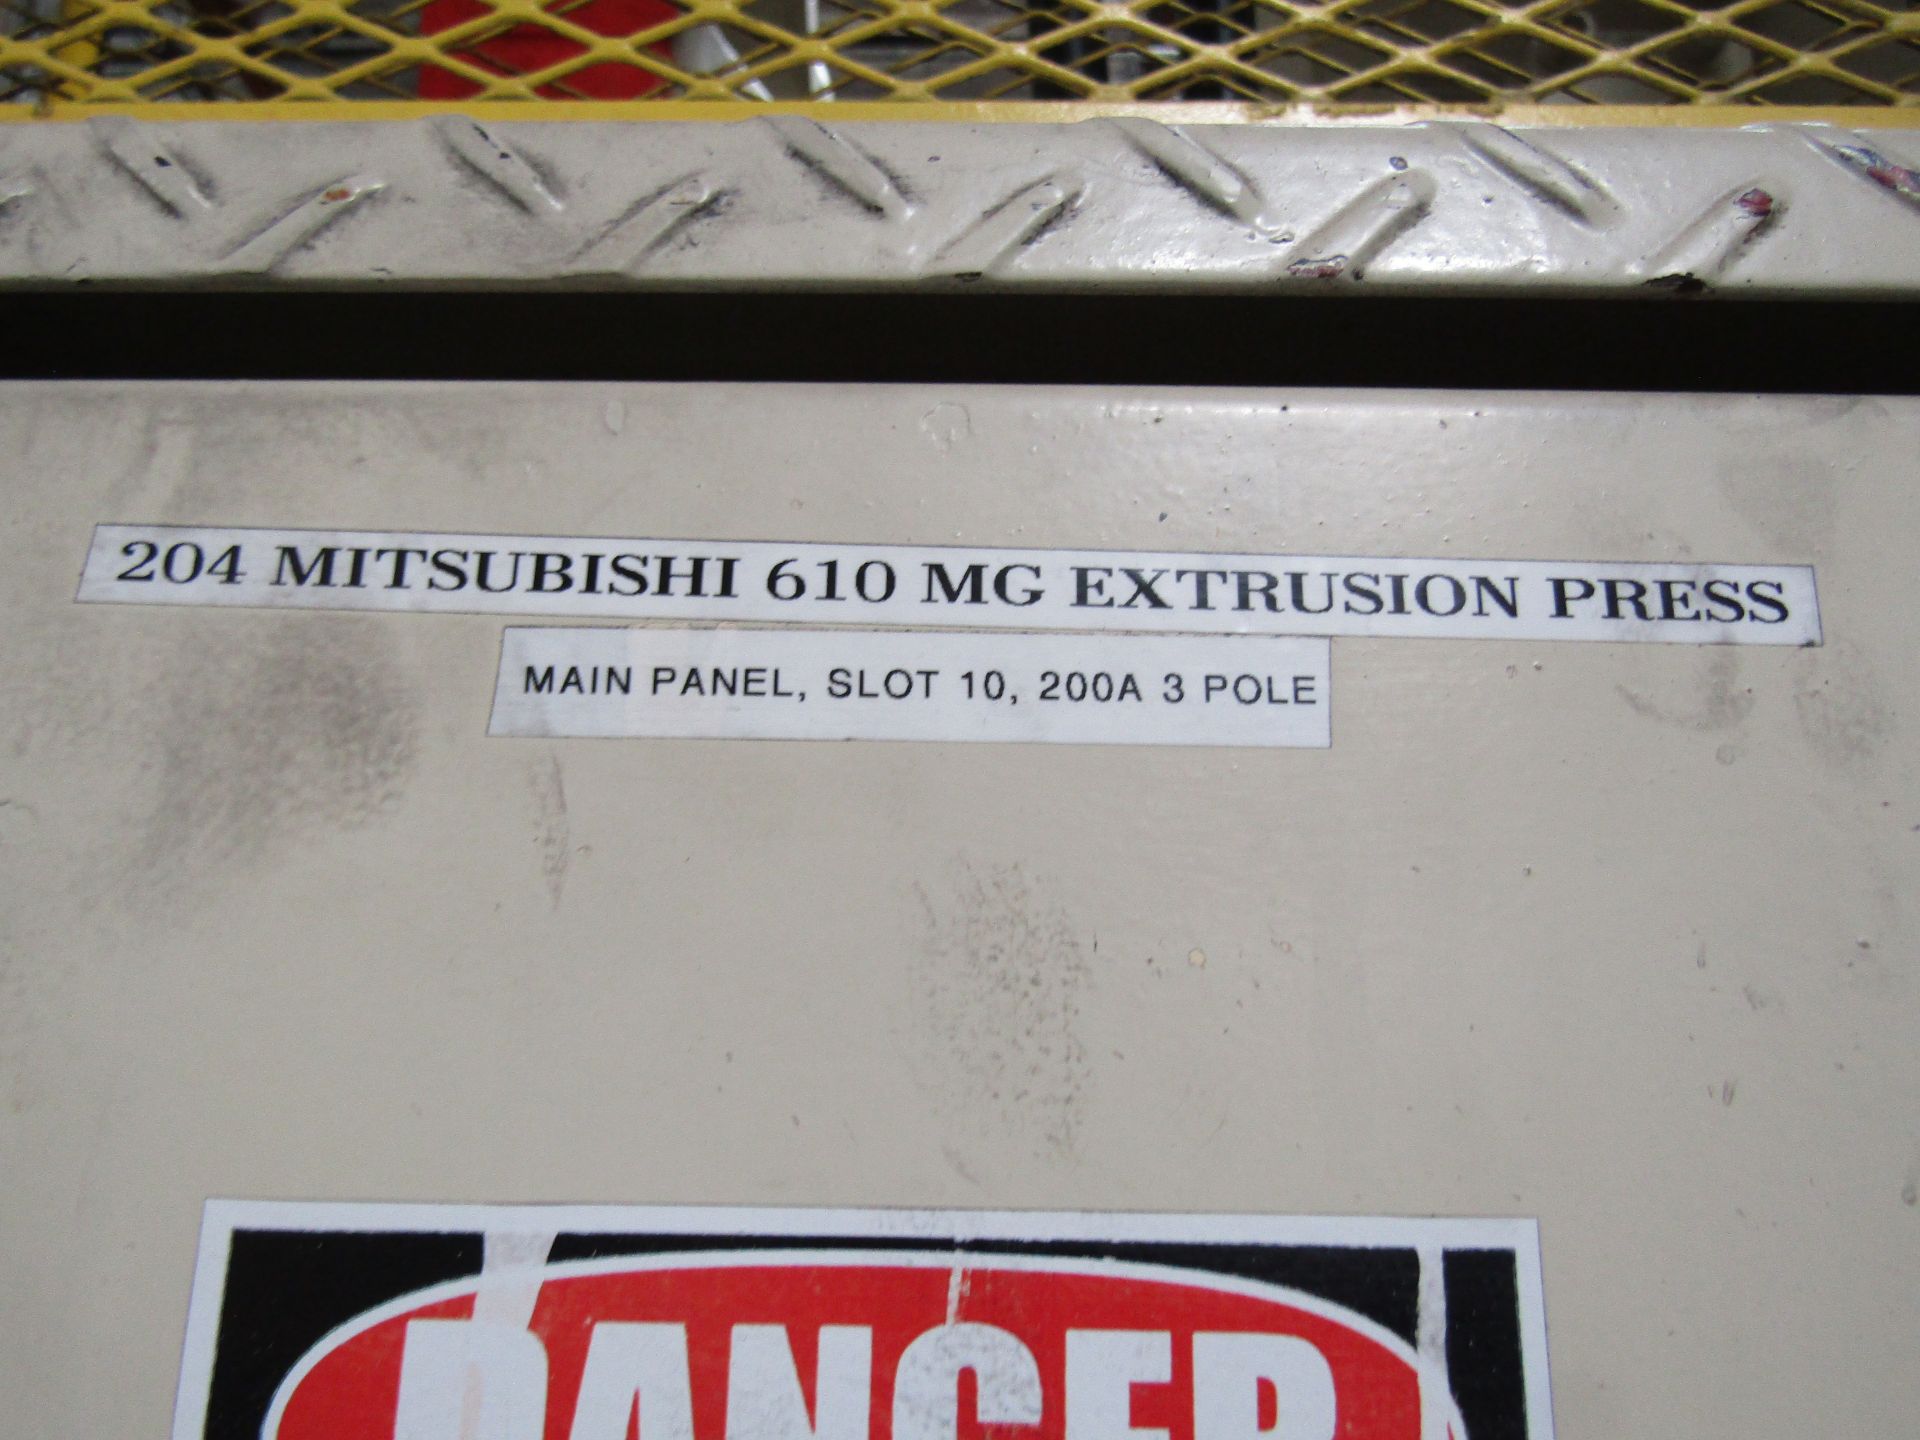 1992 MITSUBISHI 610 MG-110 4 Post Horizontal Extrusion Press With Electrical Controls, Operator - Image 6 of 11